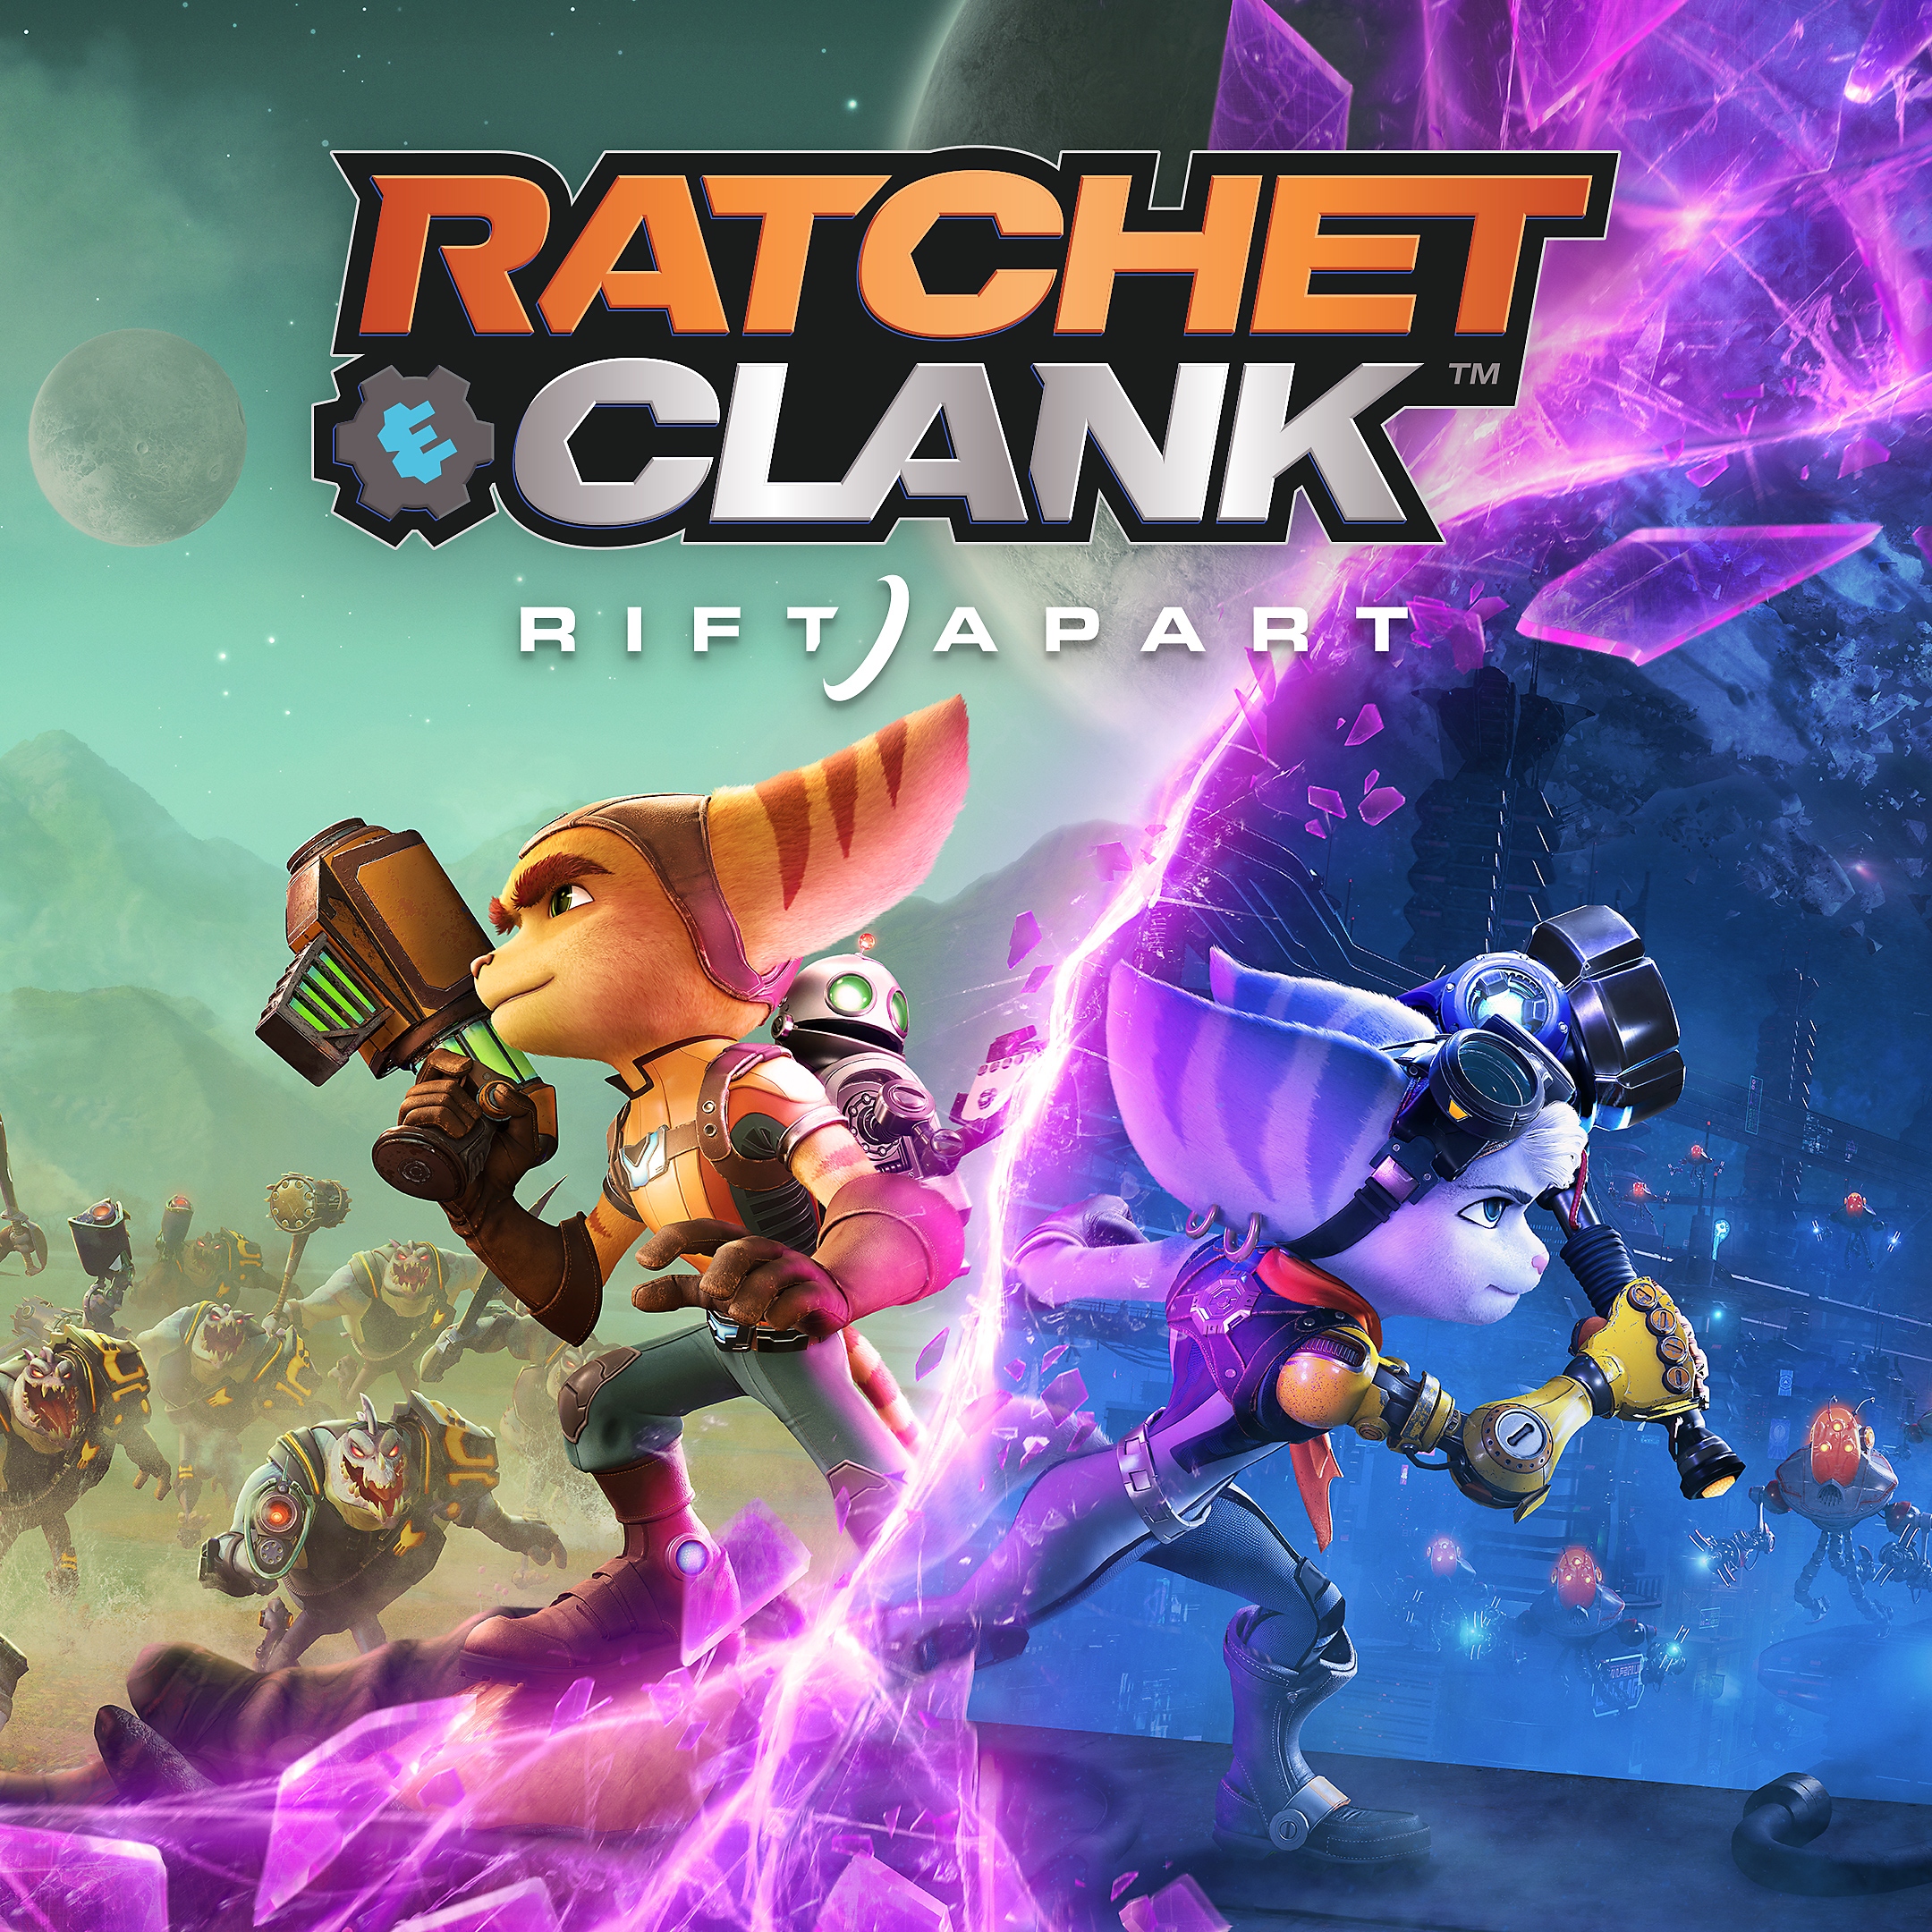 Ratchet and clank – spelikon